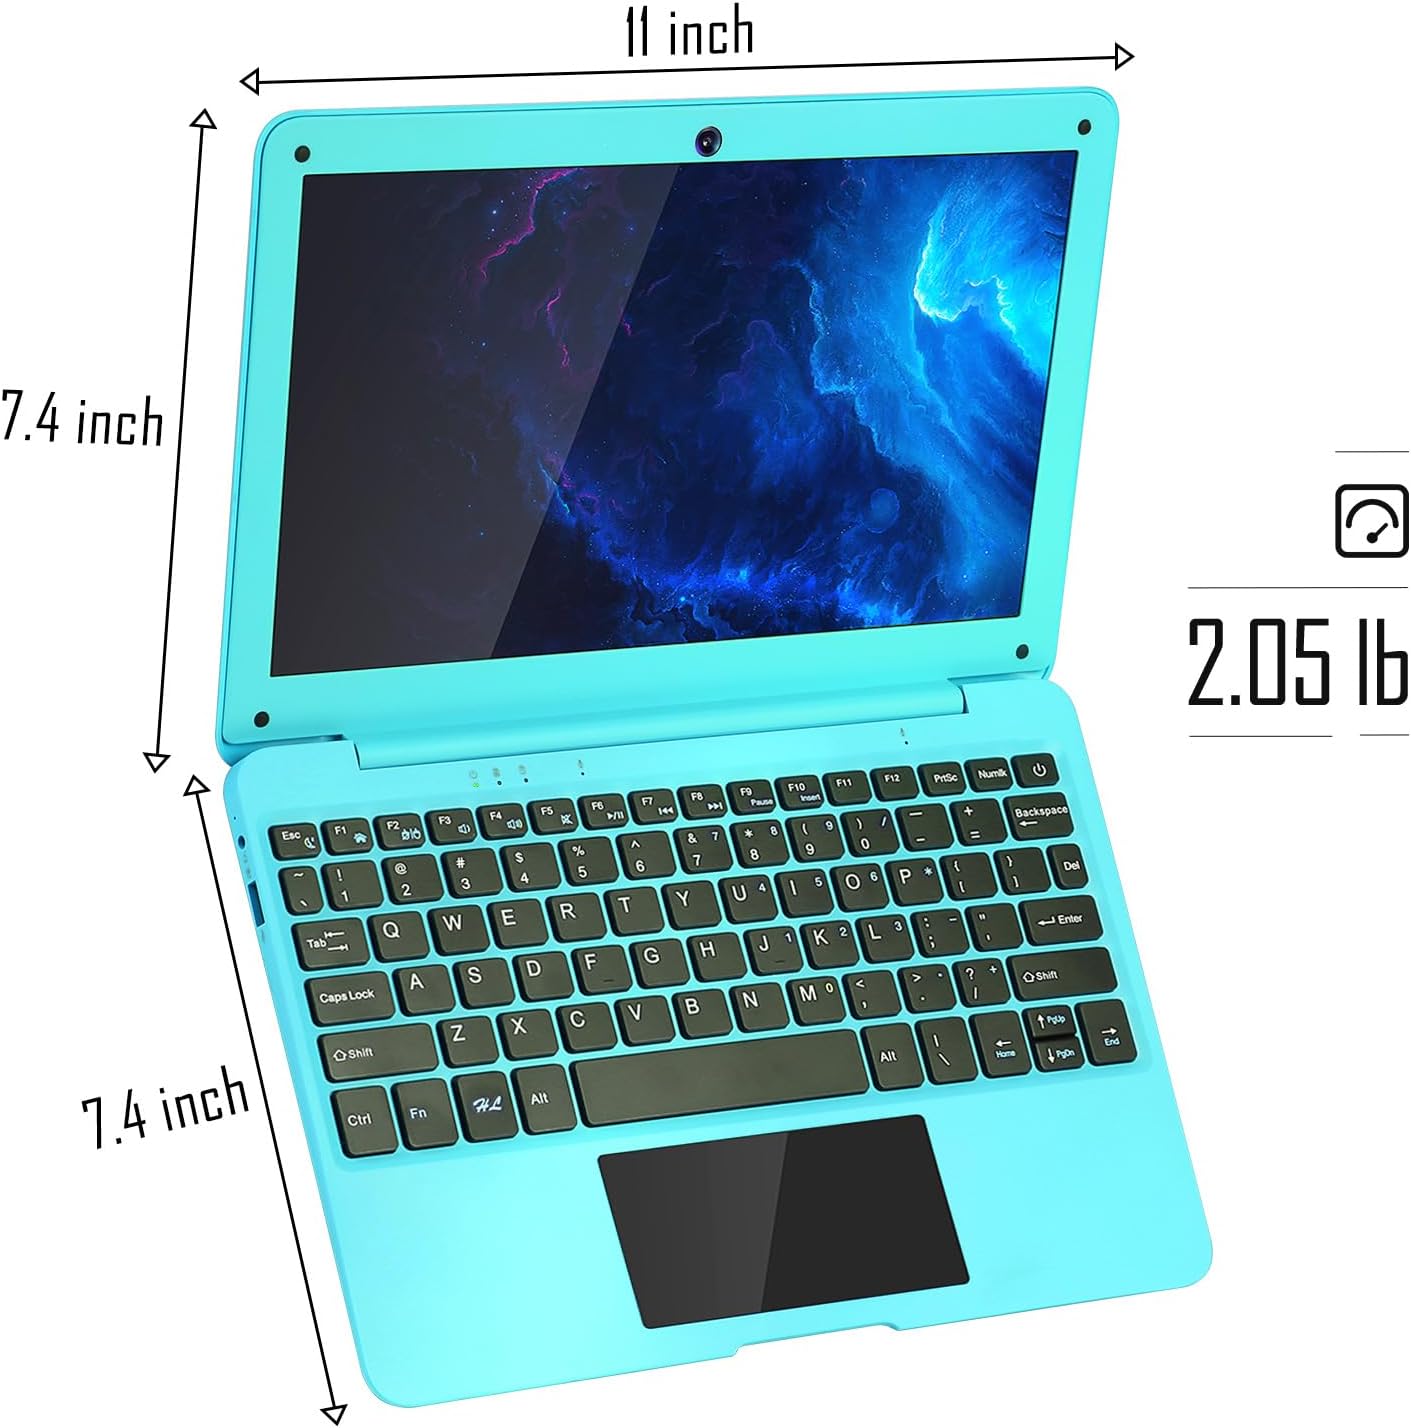 NBD Mini Laptop 10.1 inch Quad Core Powered Android 12.0 Netbook Computer with Bag, Mouse, and Mouse Pad for Kids